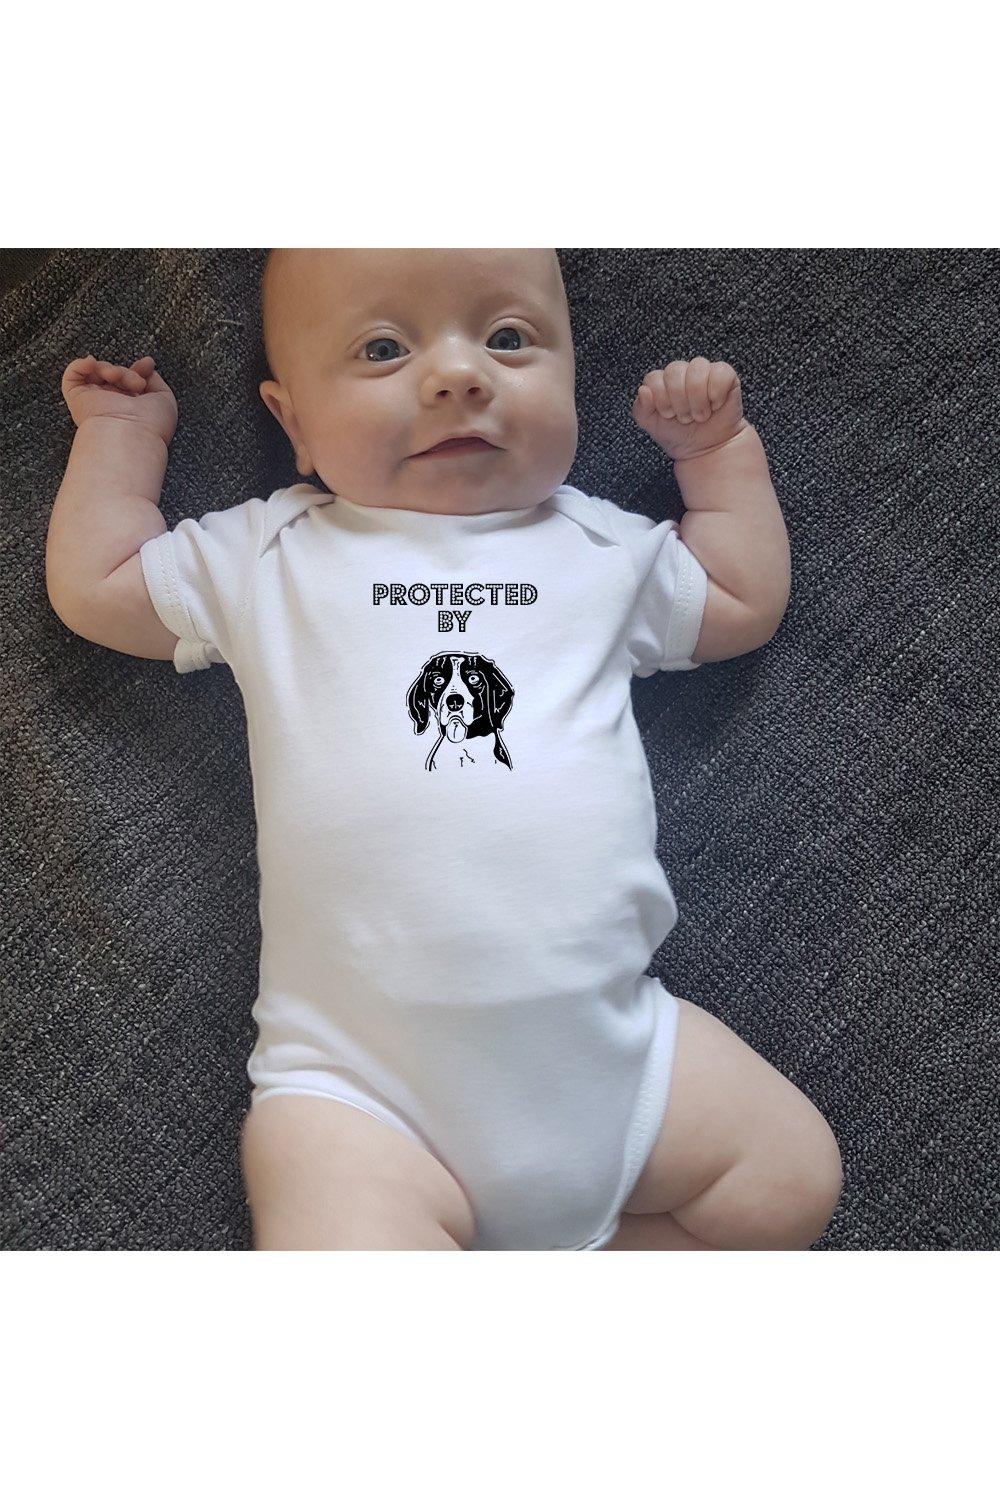 Protected by Beagle Dog Baby bodysuit and Baby Grow